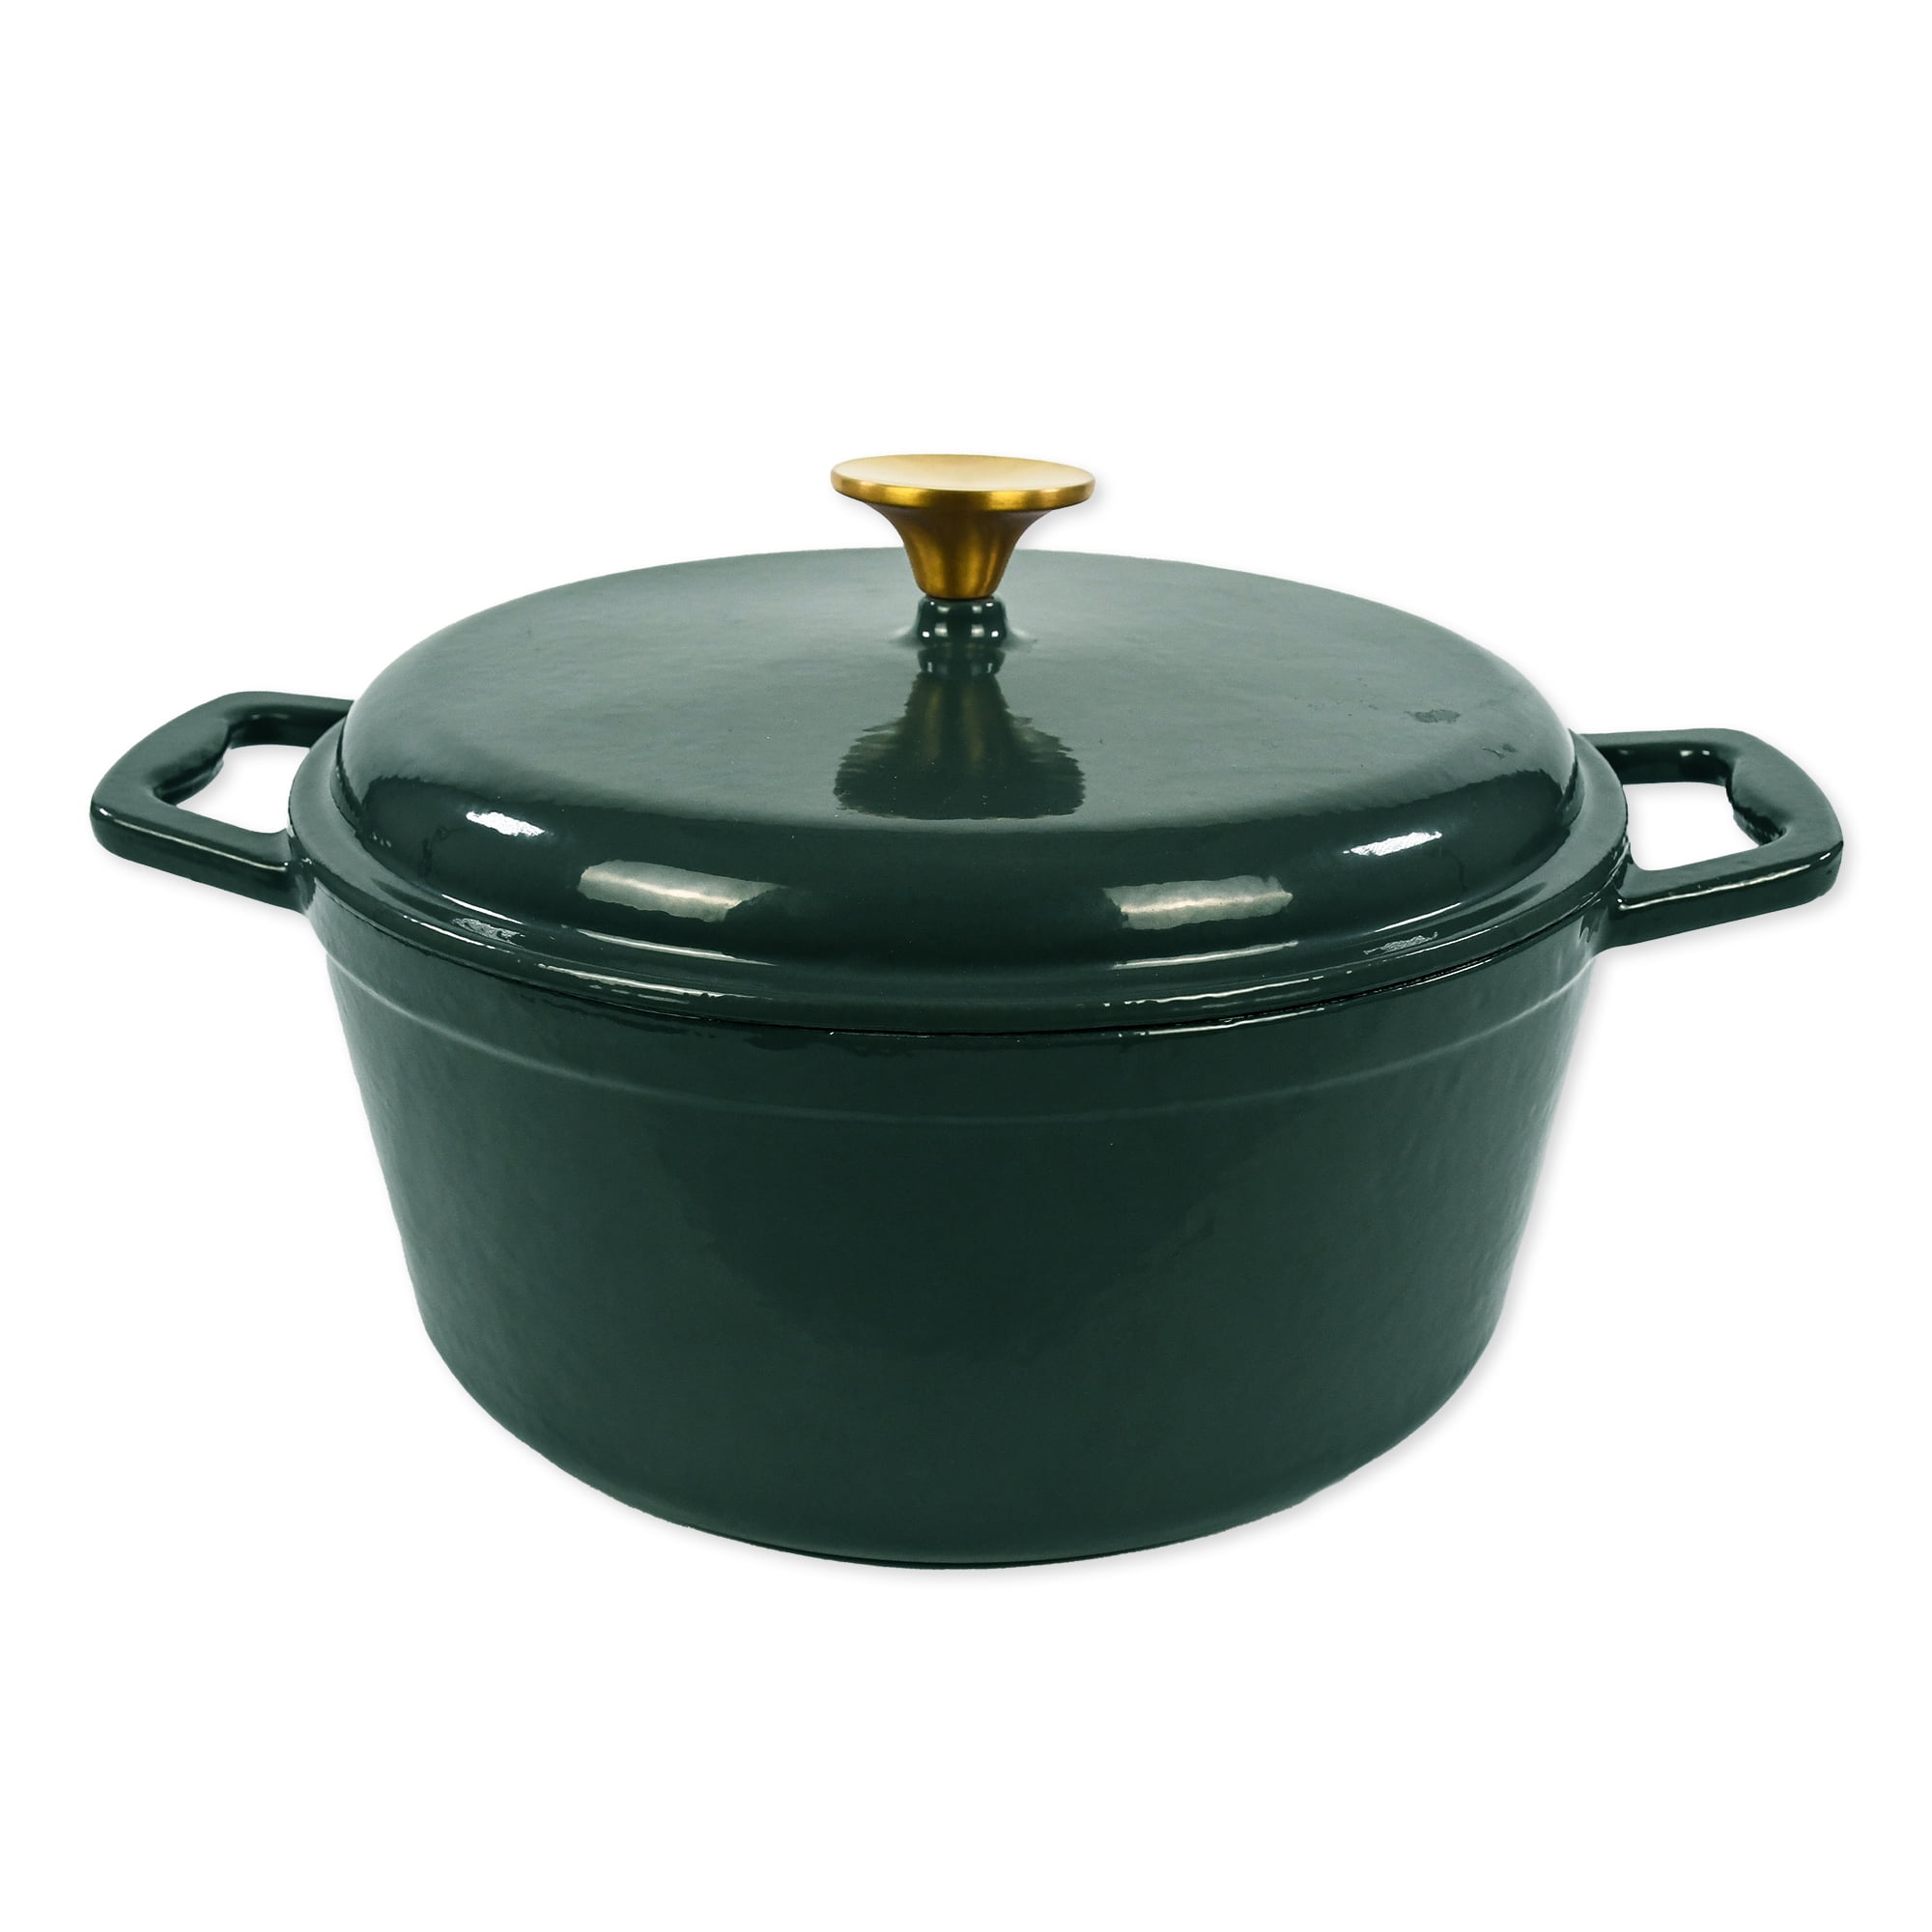 Mainstays Enameled Cast Iron 4.75qt Dutch Oven with Lid, Red 